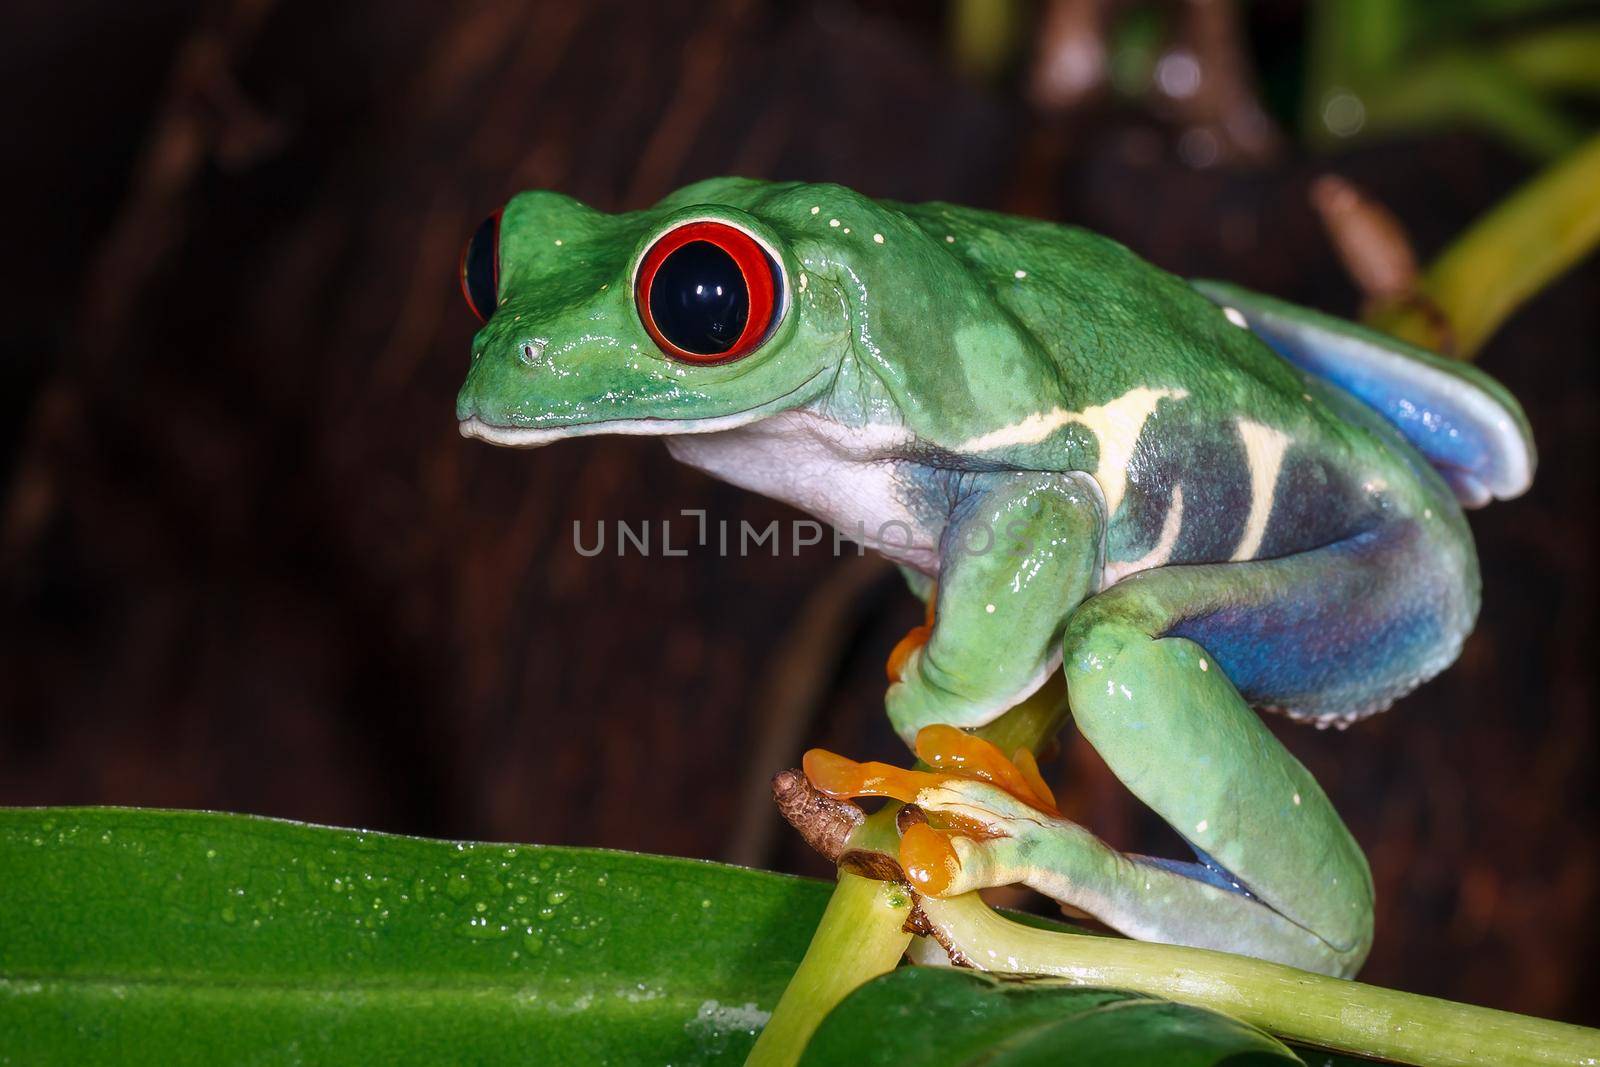 Red eyed tree frog sitting on the pitcher plant stem by Lincikas